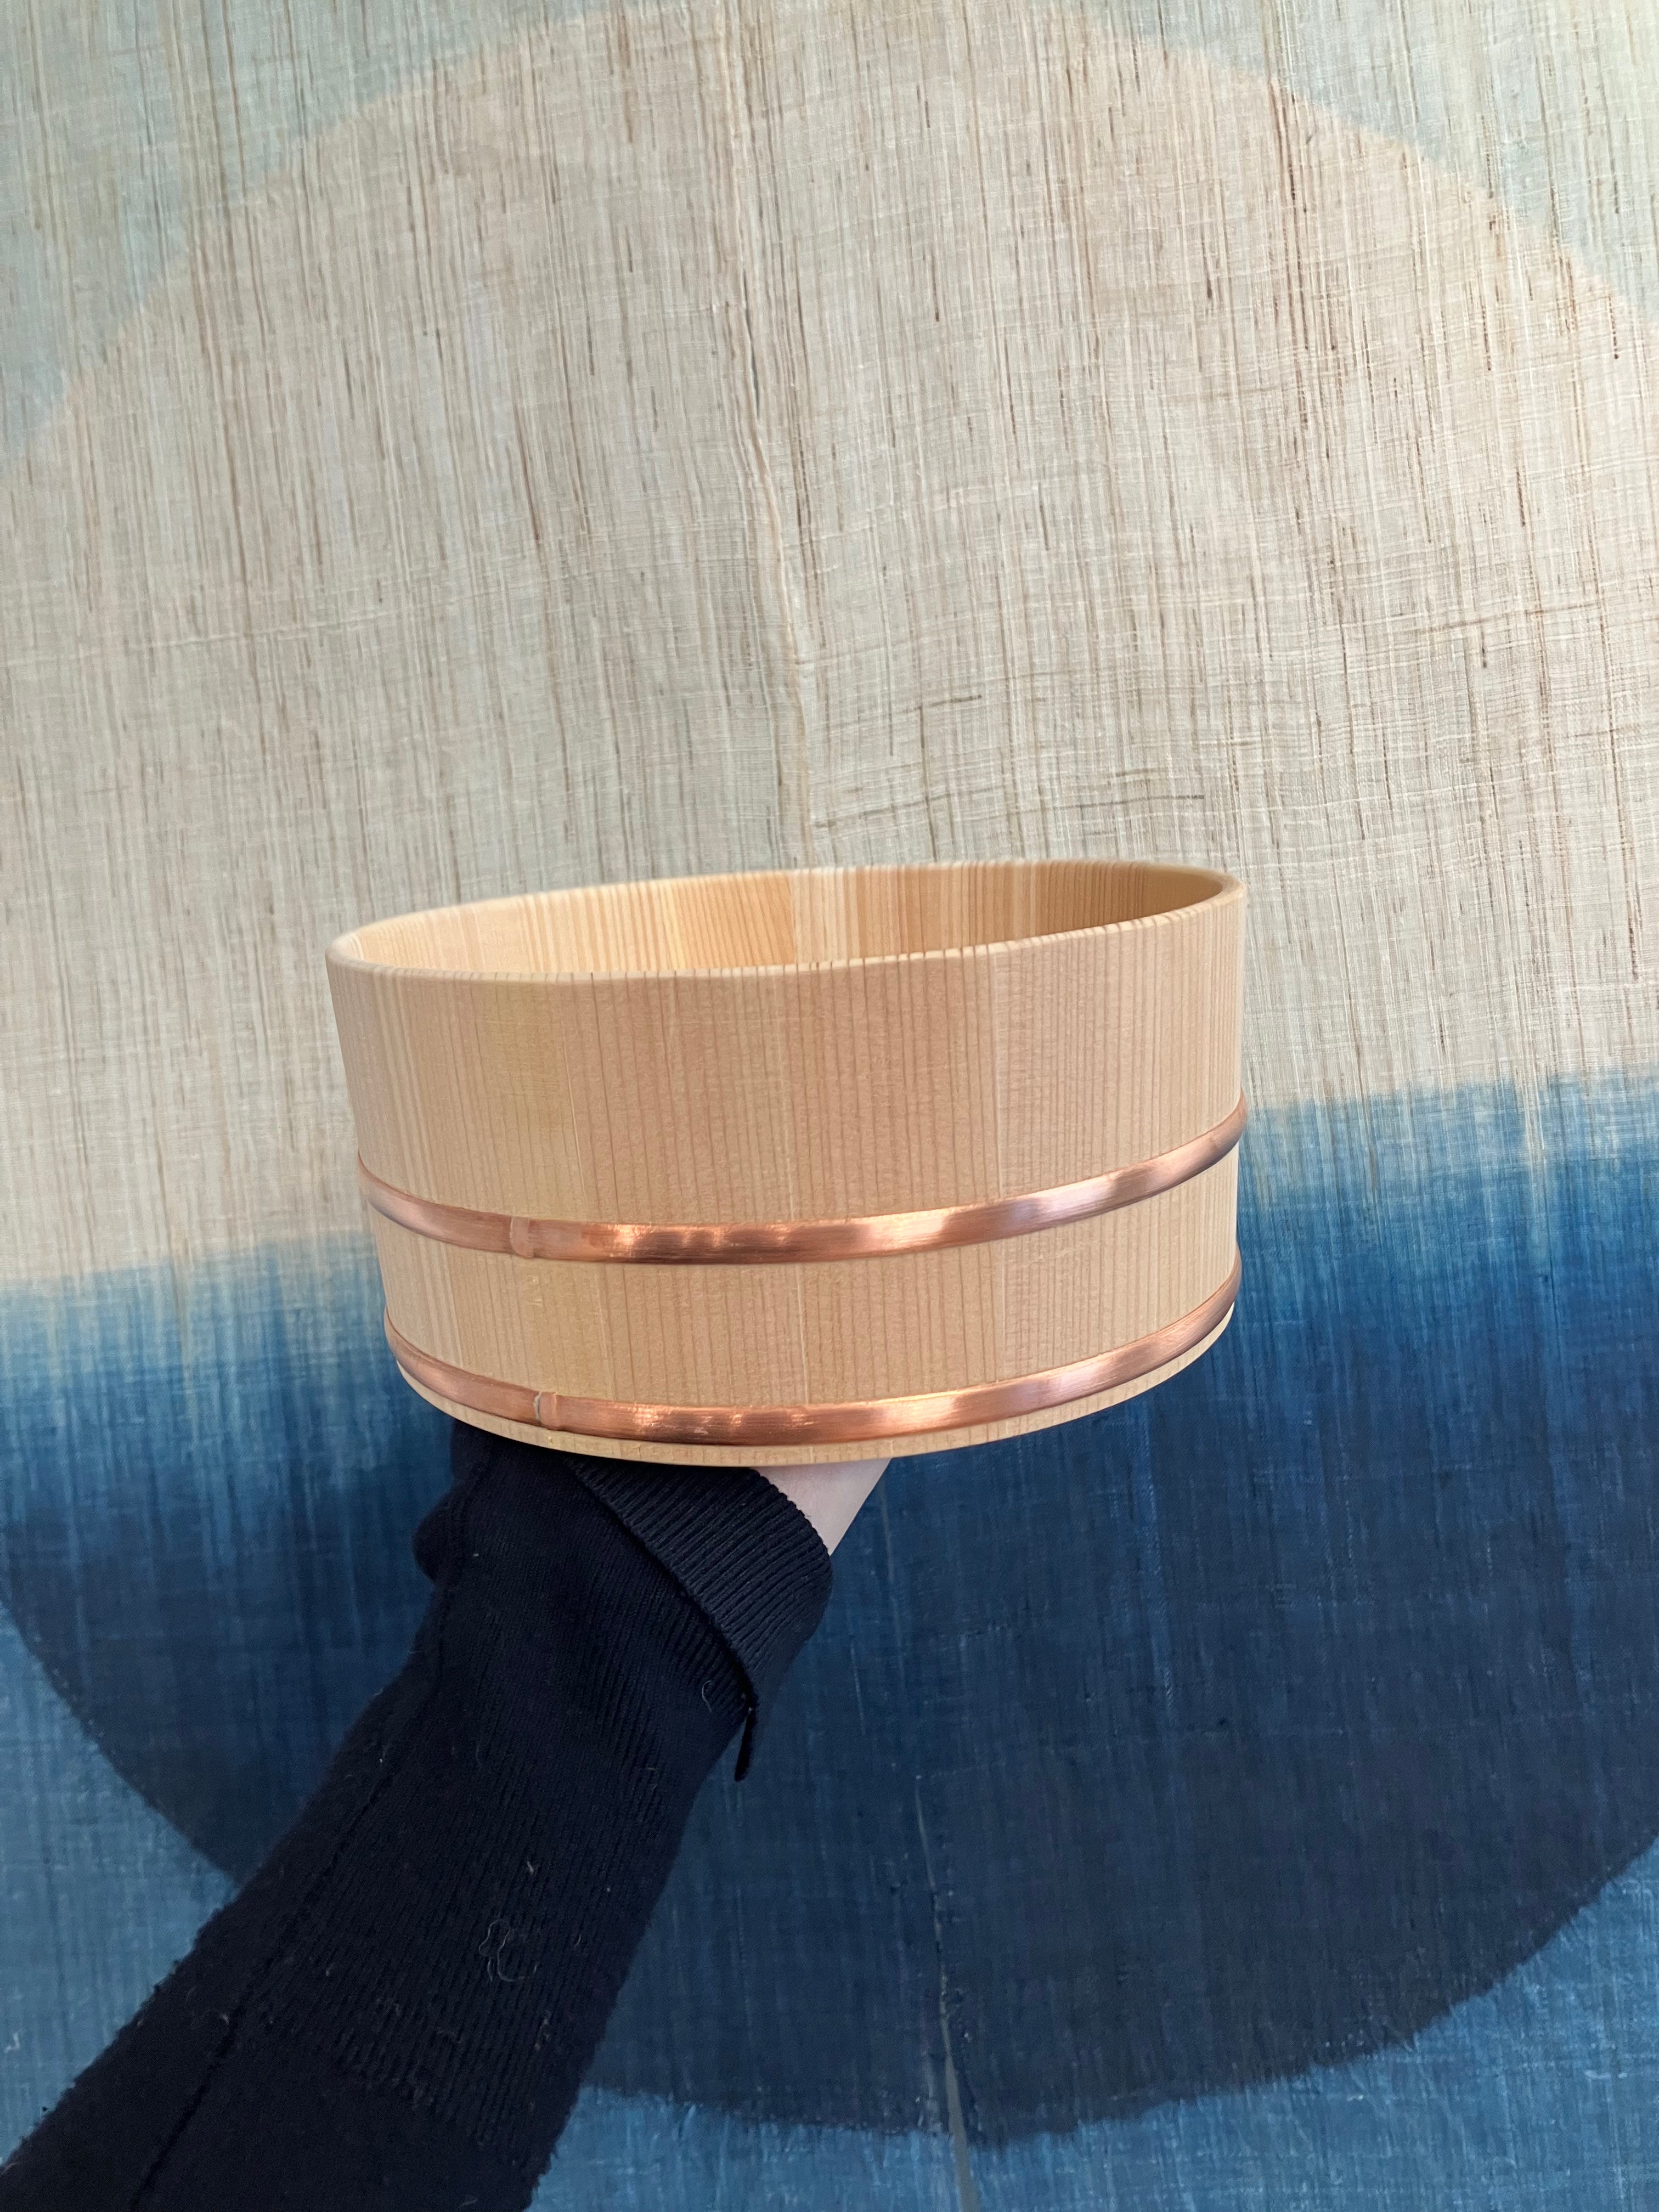 Small wooden tub with steel band